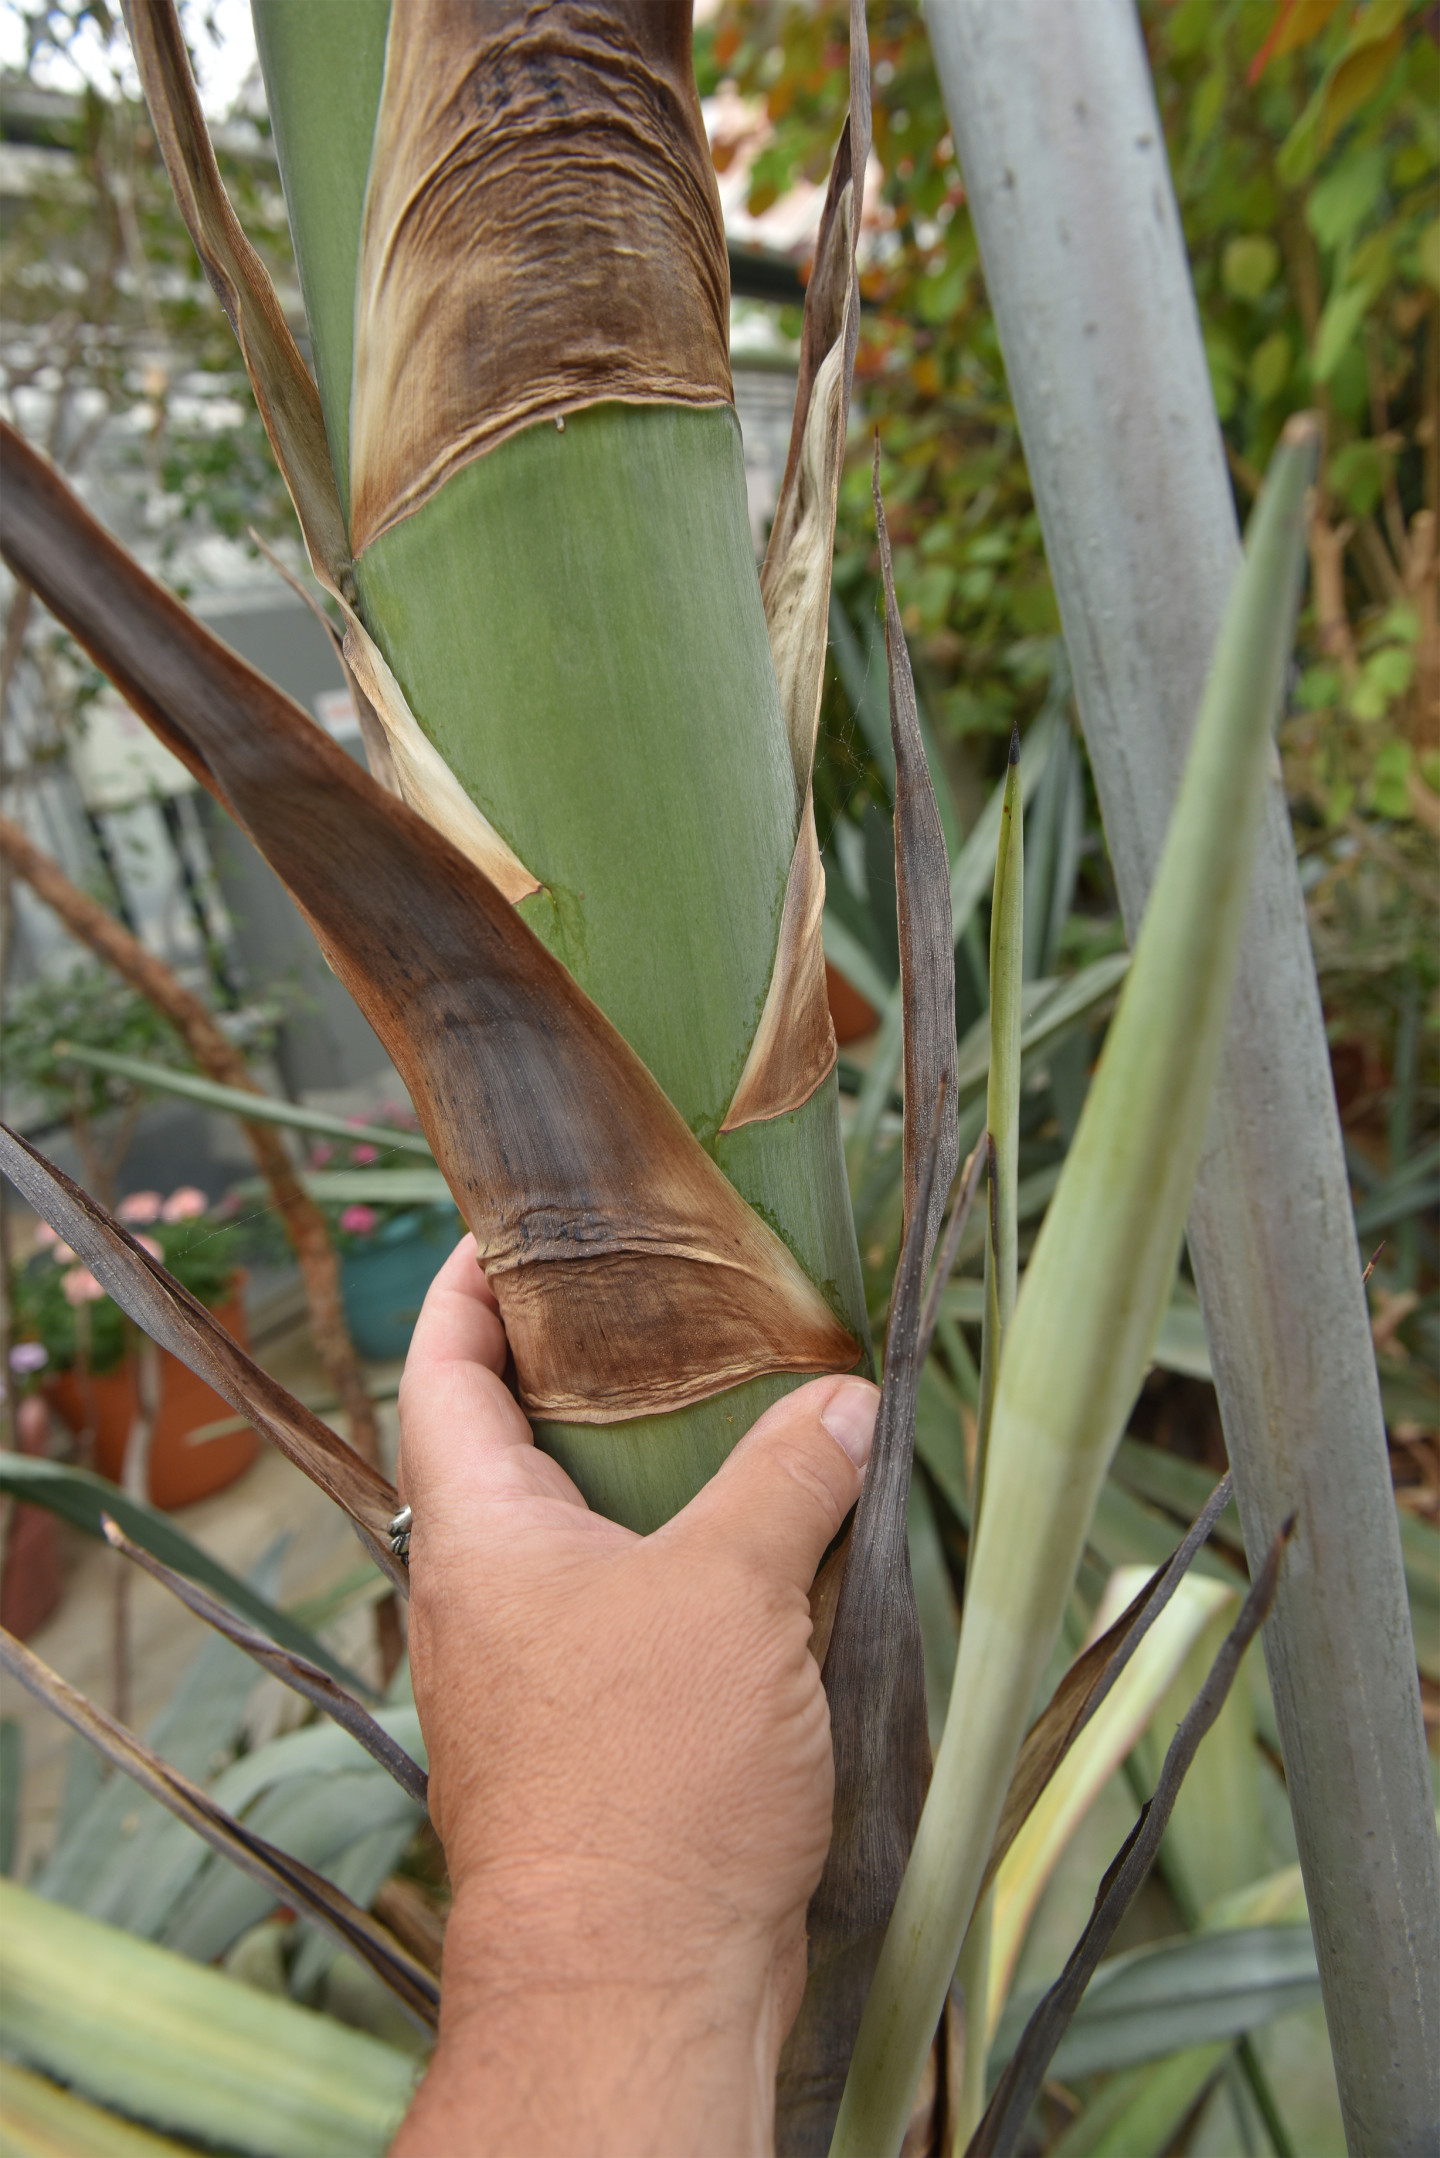 A close-up picture of the stalk of a plant.